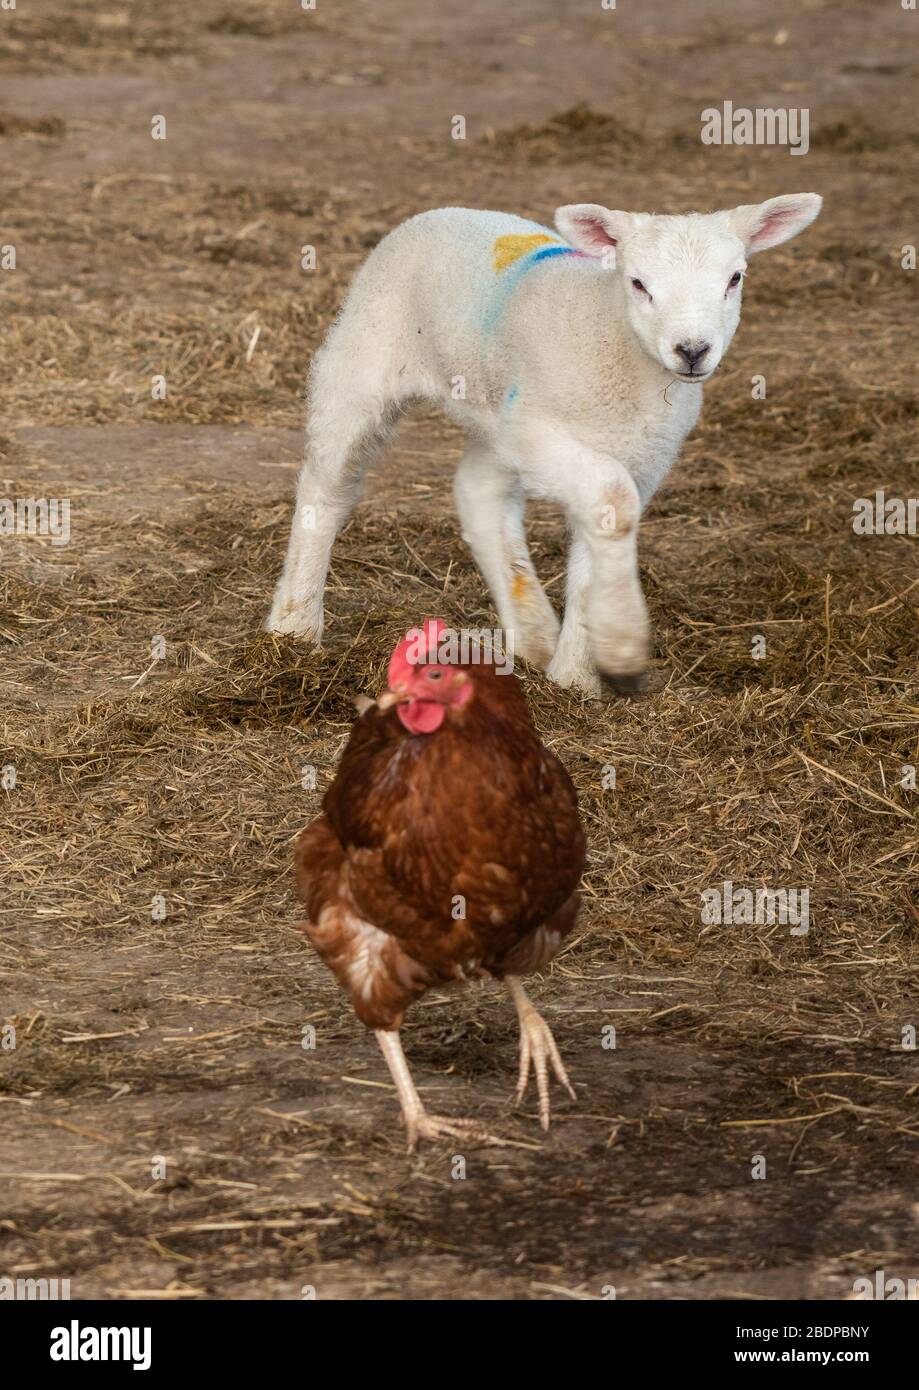 Preston, Lancashire, UK. 9th Apr, 2020. A young lamb playing with a hen in the lambing pens at Chipping, Preston, Lancashire, England, United Kingdom. The recent good weather has improved conditions for lambing so far this year. Credit: John Eveson/Alamy Live News Stock Photo